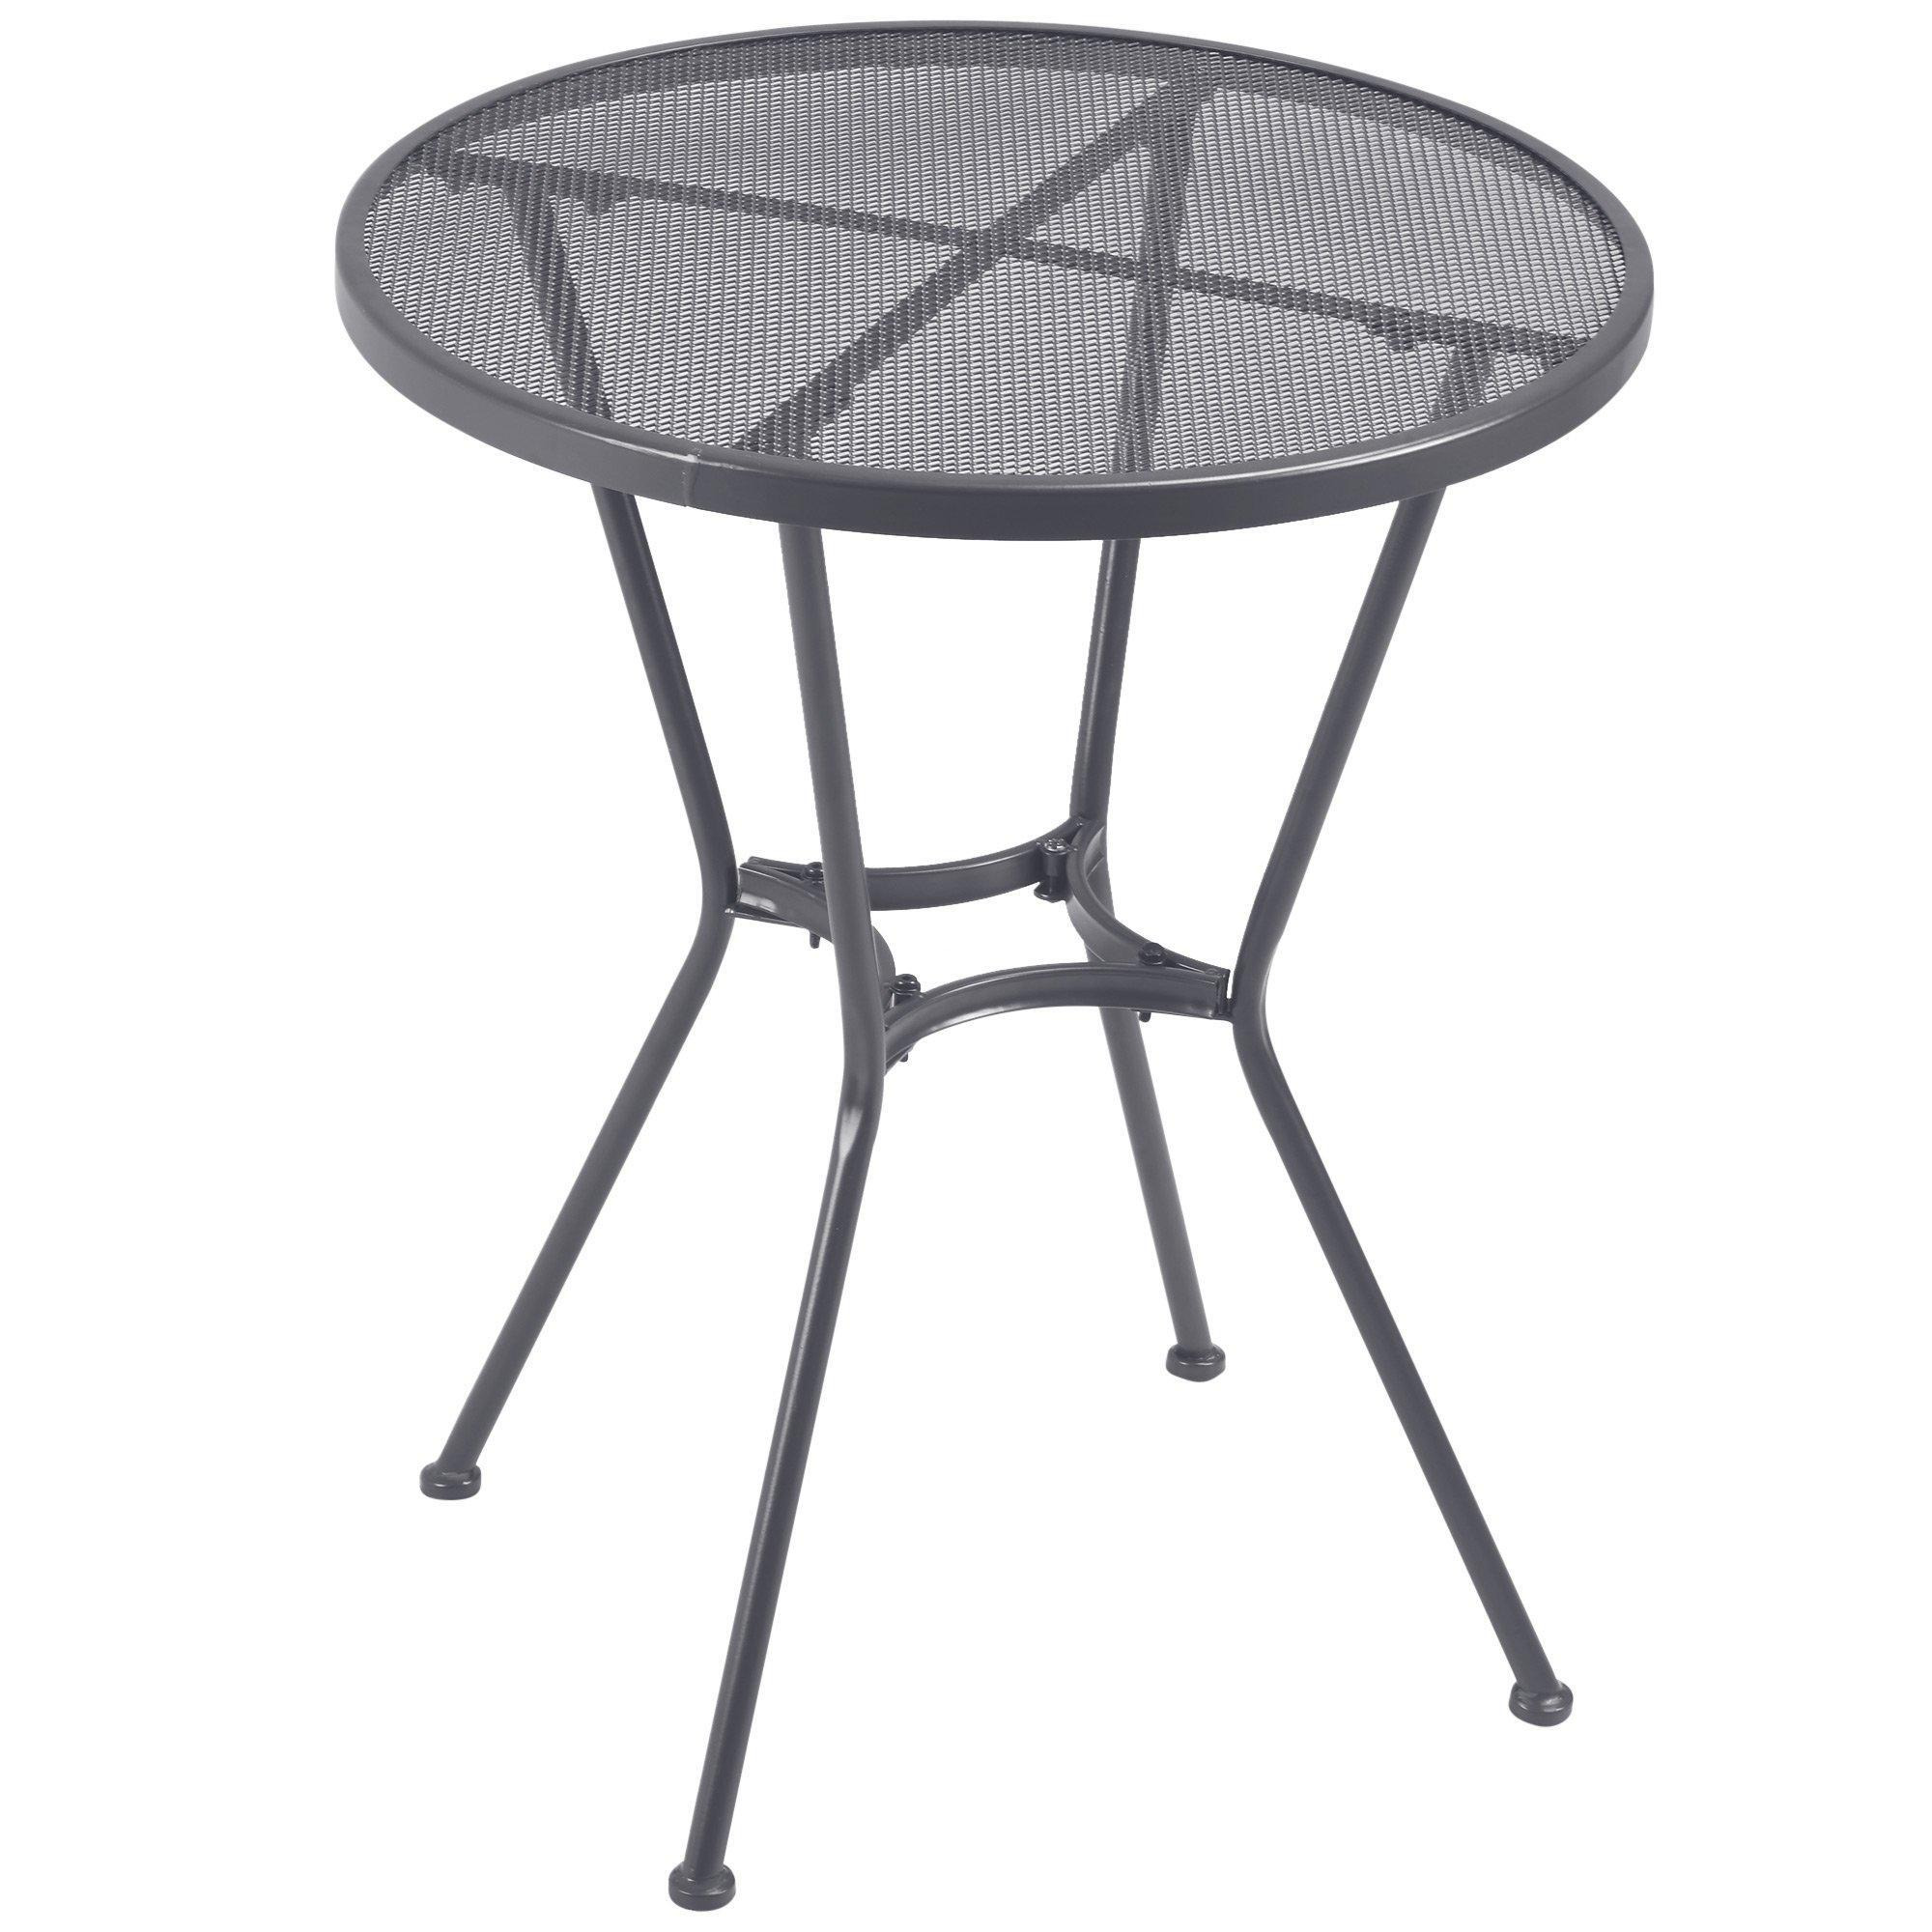 60cm Garden Round Bistro Table with Mesh Tabletop for Balcony Deck - image 1